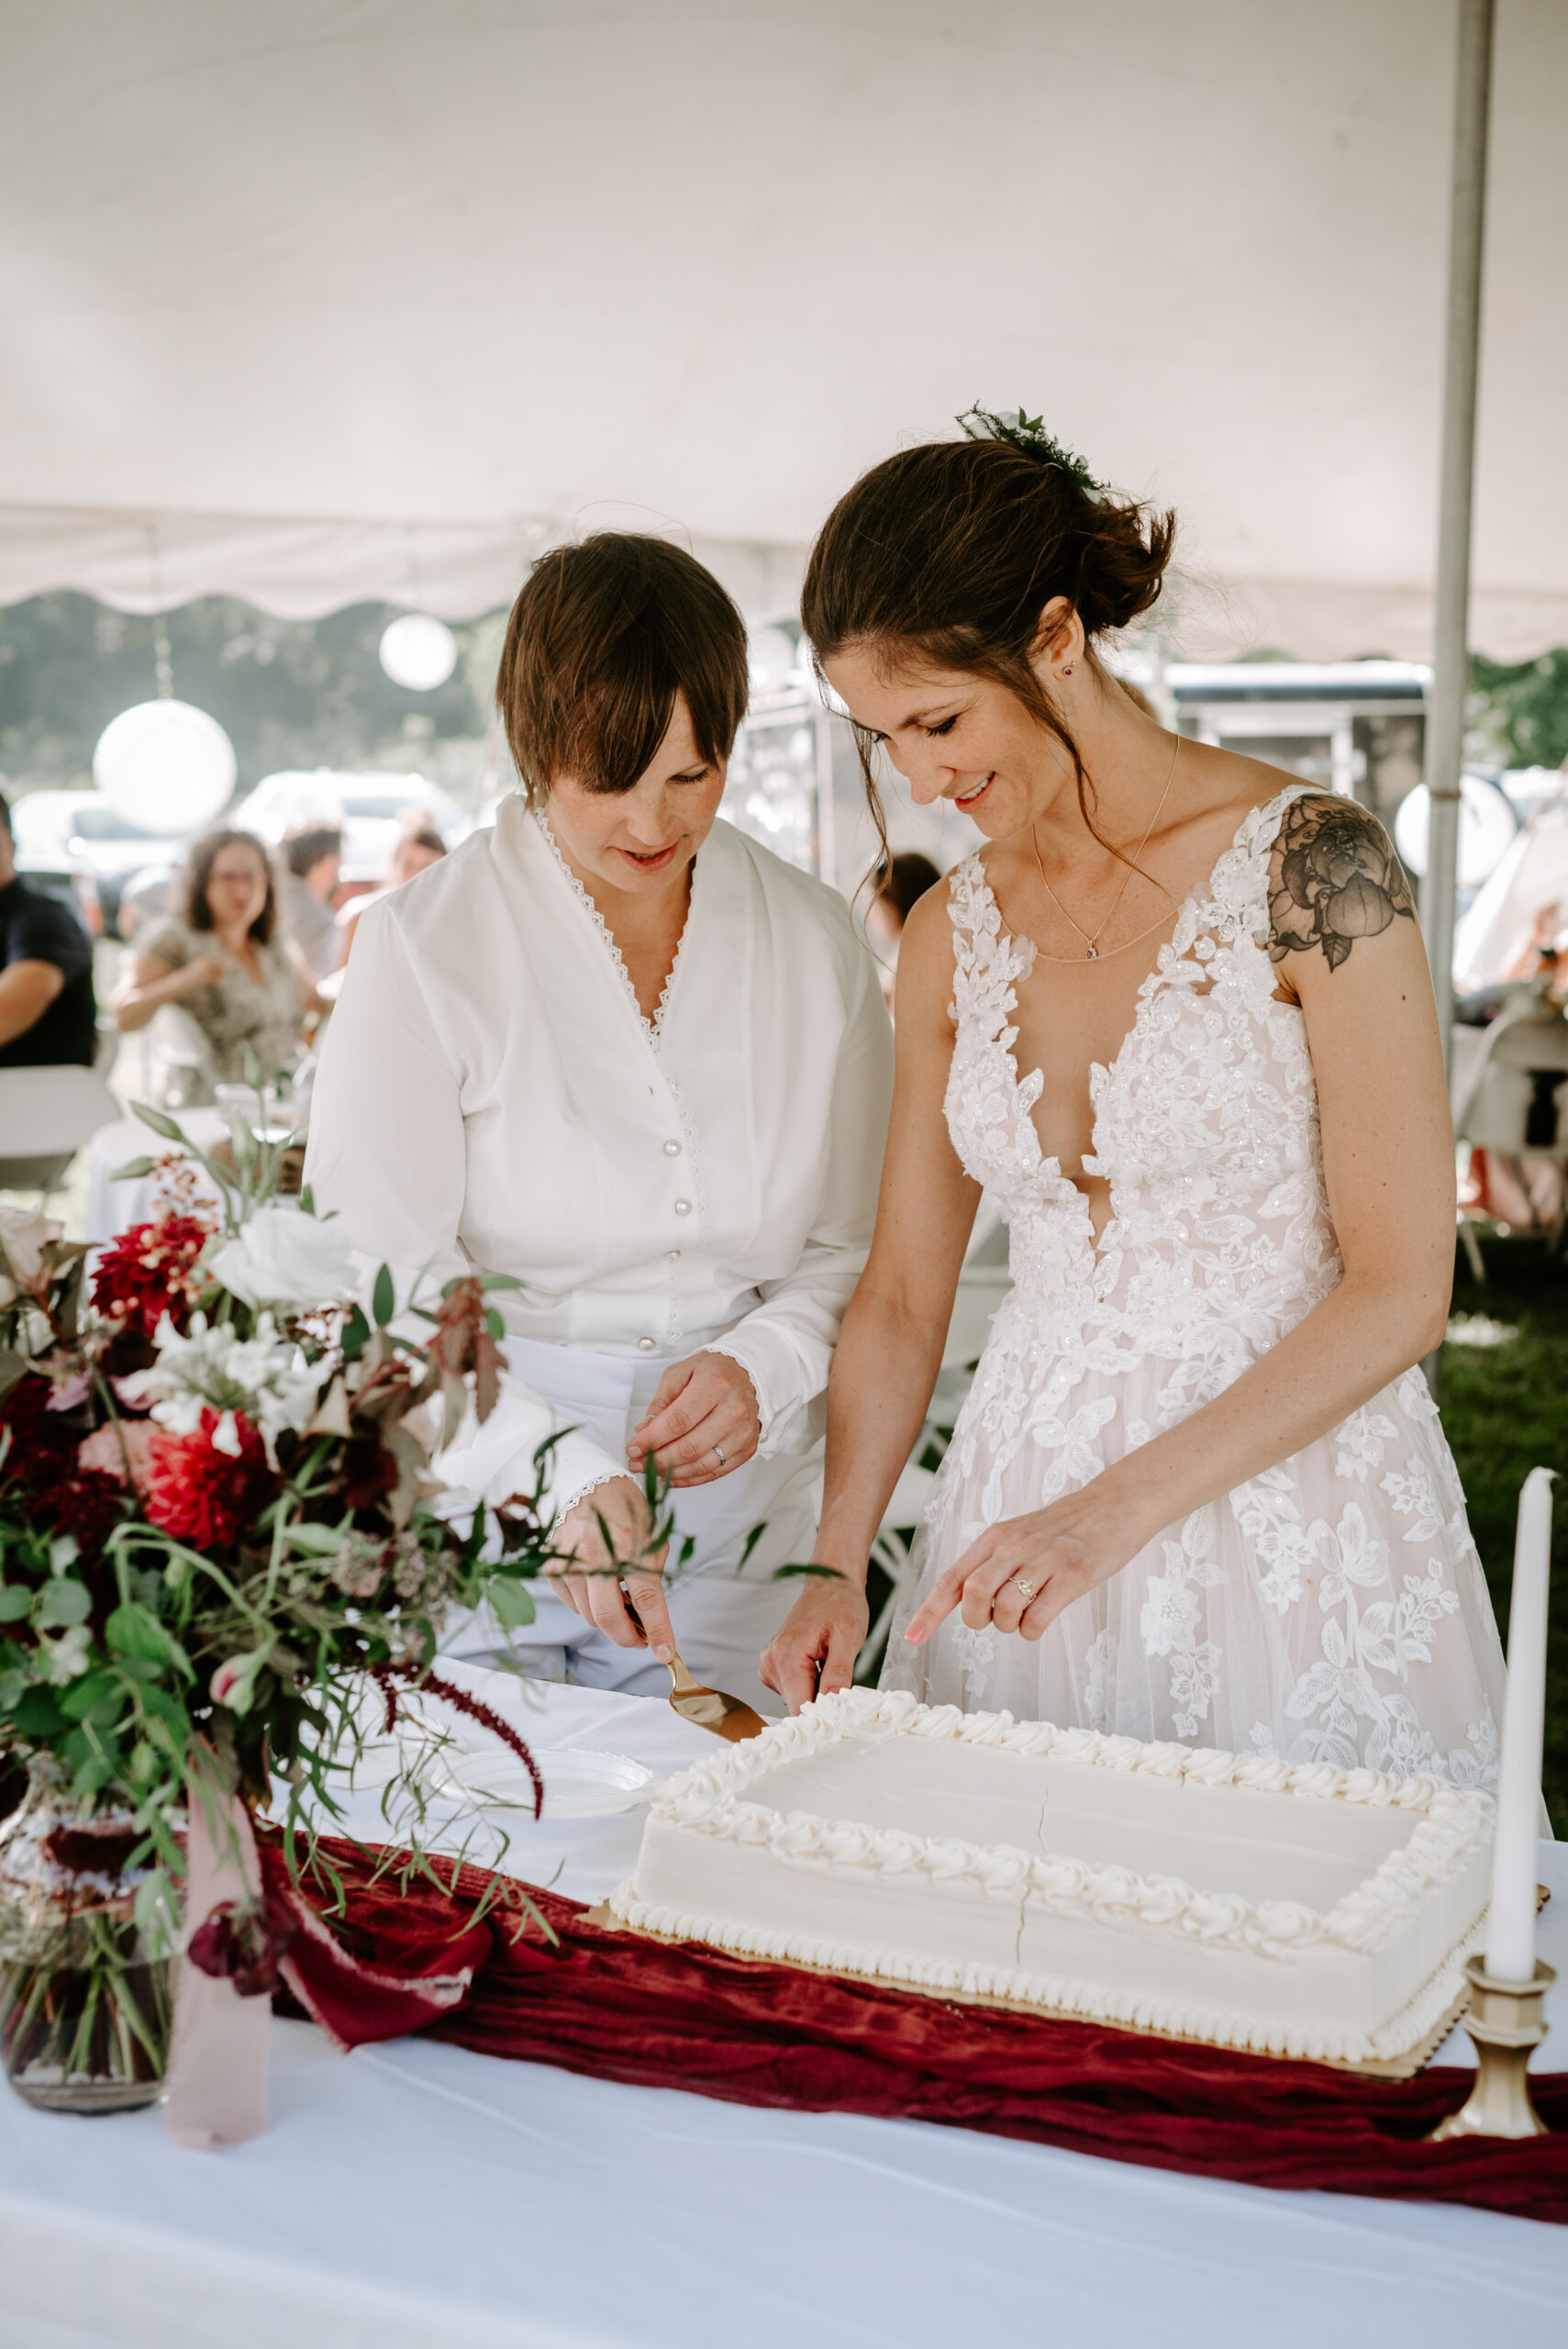 Two brides cutting a cake from Bert's bakery in Kalamazoo Michigan photographed by Liv Lyszyk photography queer inclusive photographer in Michigan tented receptions in Michigan Michigan tent wedding